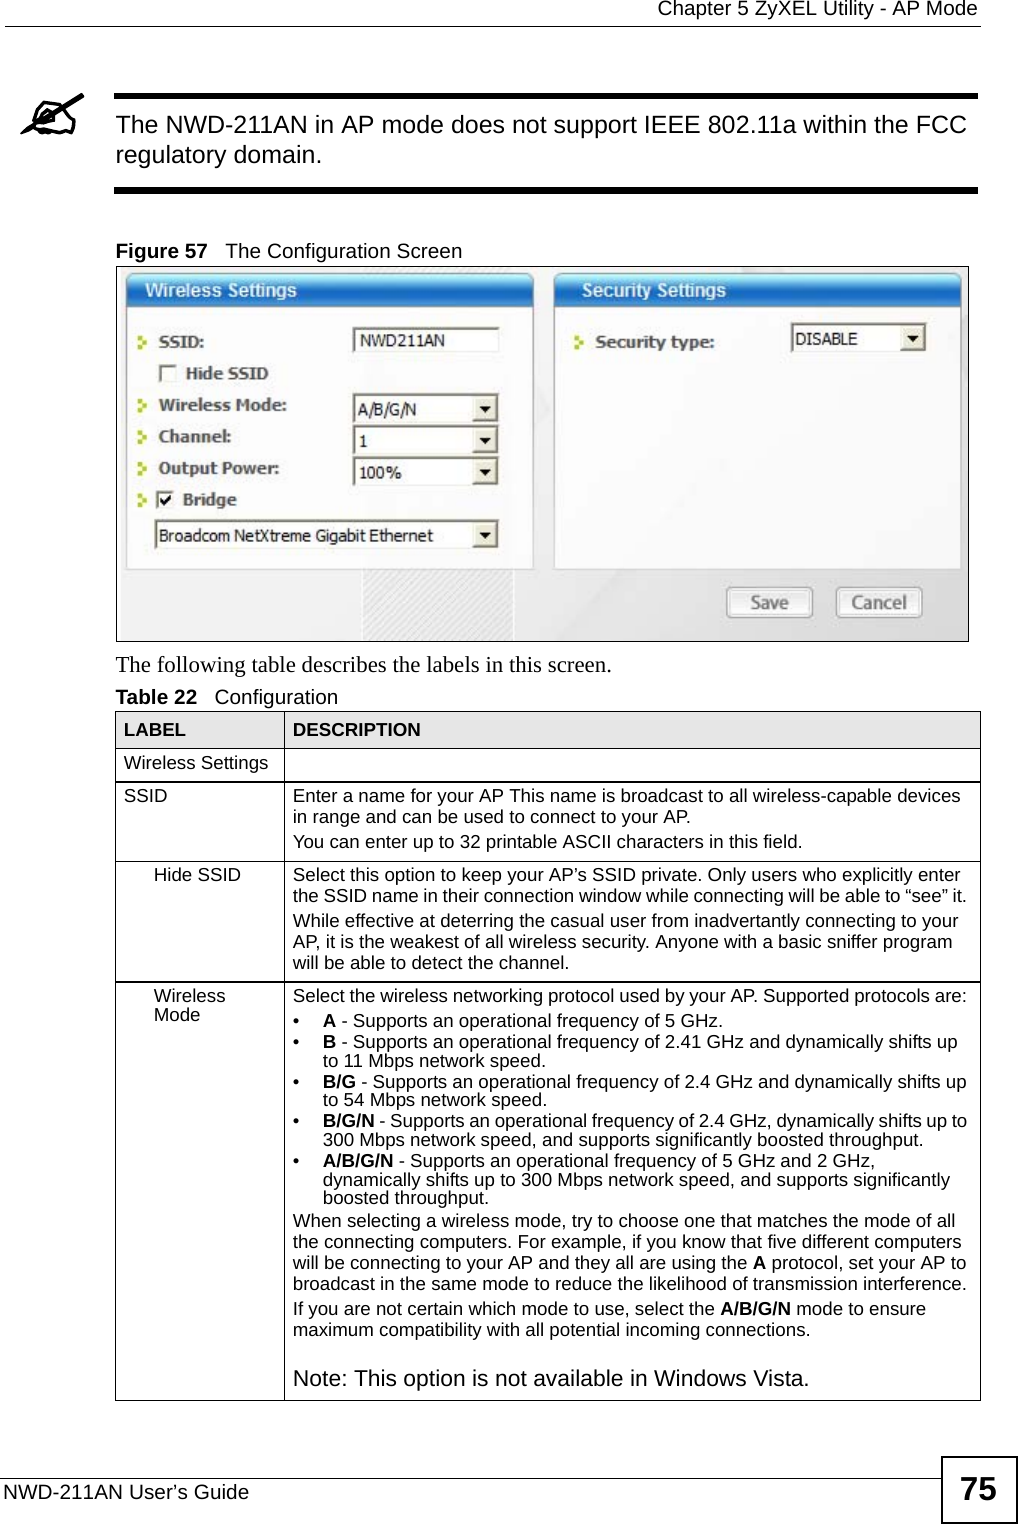  Chapter 5 ZyXEL Utility - AP ModeNWD-211AN User’s Guide 75&quot;The NWD-211AN in AP mode does not support IEEE 802.11a within the FCC regulatory domain.Figure 57   The Configuration ScreenThe following table describes the labels in this screen. Table 22   Configuration LABEL DESCRIPTIONWireless SettingsSSID Enter a name for your AP This name is broadcast to all wireless-capable devices in range and can be used to connect to your AP.You can enter up to 32 printable ASCII characters in this field.Hide SSID Select this option to keep your AP’s SSID private. Only users who explicitly enter the SSID name in their connection window while connecting will be able to “see” it. While effective at deterring the casual user from inadvertantly connecting to your AP, it is the weakest of all wireless security. Anyone with a basic sniffer program will be able to detect the channel.Wireless Mode Select the wireless networking protocol used by your AP. Supported protocols are: •A - Supports an operational frequency of 5 GHz.•B - Supports an operational frequency of 2.41 GHz and dynamically shifts up to 11 Mbps network speed.•B/G - Supports an operational frequency of 2.4 GHz and dynamically shifts up to 54 Mbps network speed.•B/G/N - Supports an operational frequency of 2.4 GHz, dynamically shifts up to 300 Mbps network speed, and supports significantly boosted throughput.•A/B/G/N - Supports an operational frequency of 5 GHz and 2 GHz, dynamically shifts up to 300 Mbps network speed, and supports significantly boosted throughput.When selecting a wireless mode, try to choose one that matches the mode of all the connecting computers. For example, if you know that five different computers will be connecting to your AP and they all are using the A protocol, set your AP to broadcast in the same mode to reduce the likelihood of transmission interference.If you are not certain which mode to use, select the A/B/G/N mode to ensure maximum compatibility with all potential incoming connections.Note: This option is not available in Windows Vista.